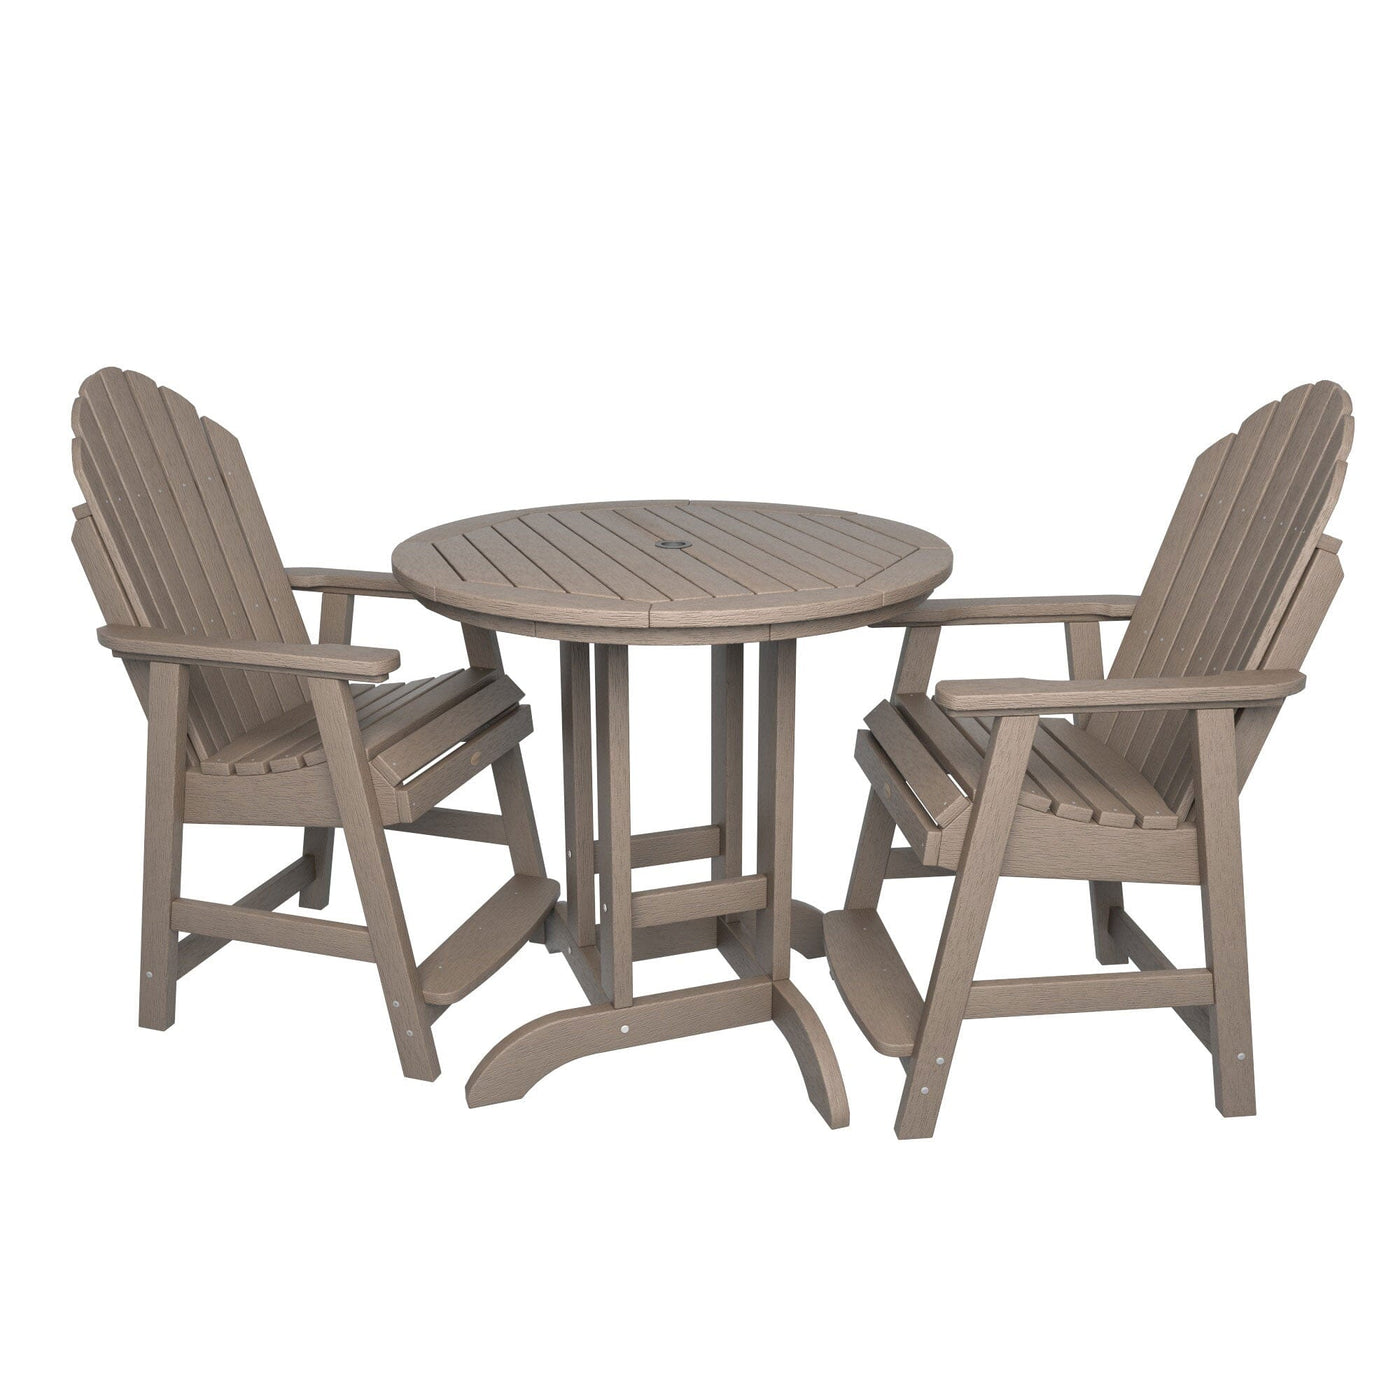 Hamilton 3pc 36in Round Dining Set - Counter Height Dining Highwood USA Woodland Brown 